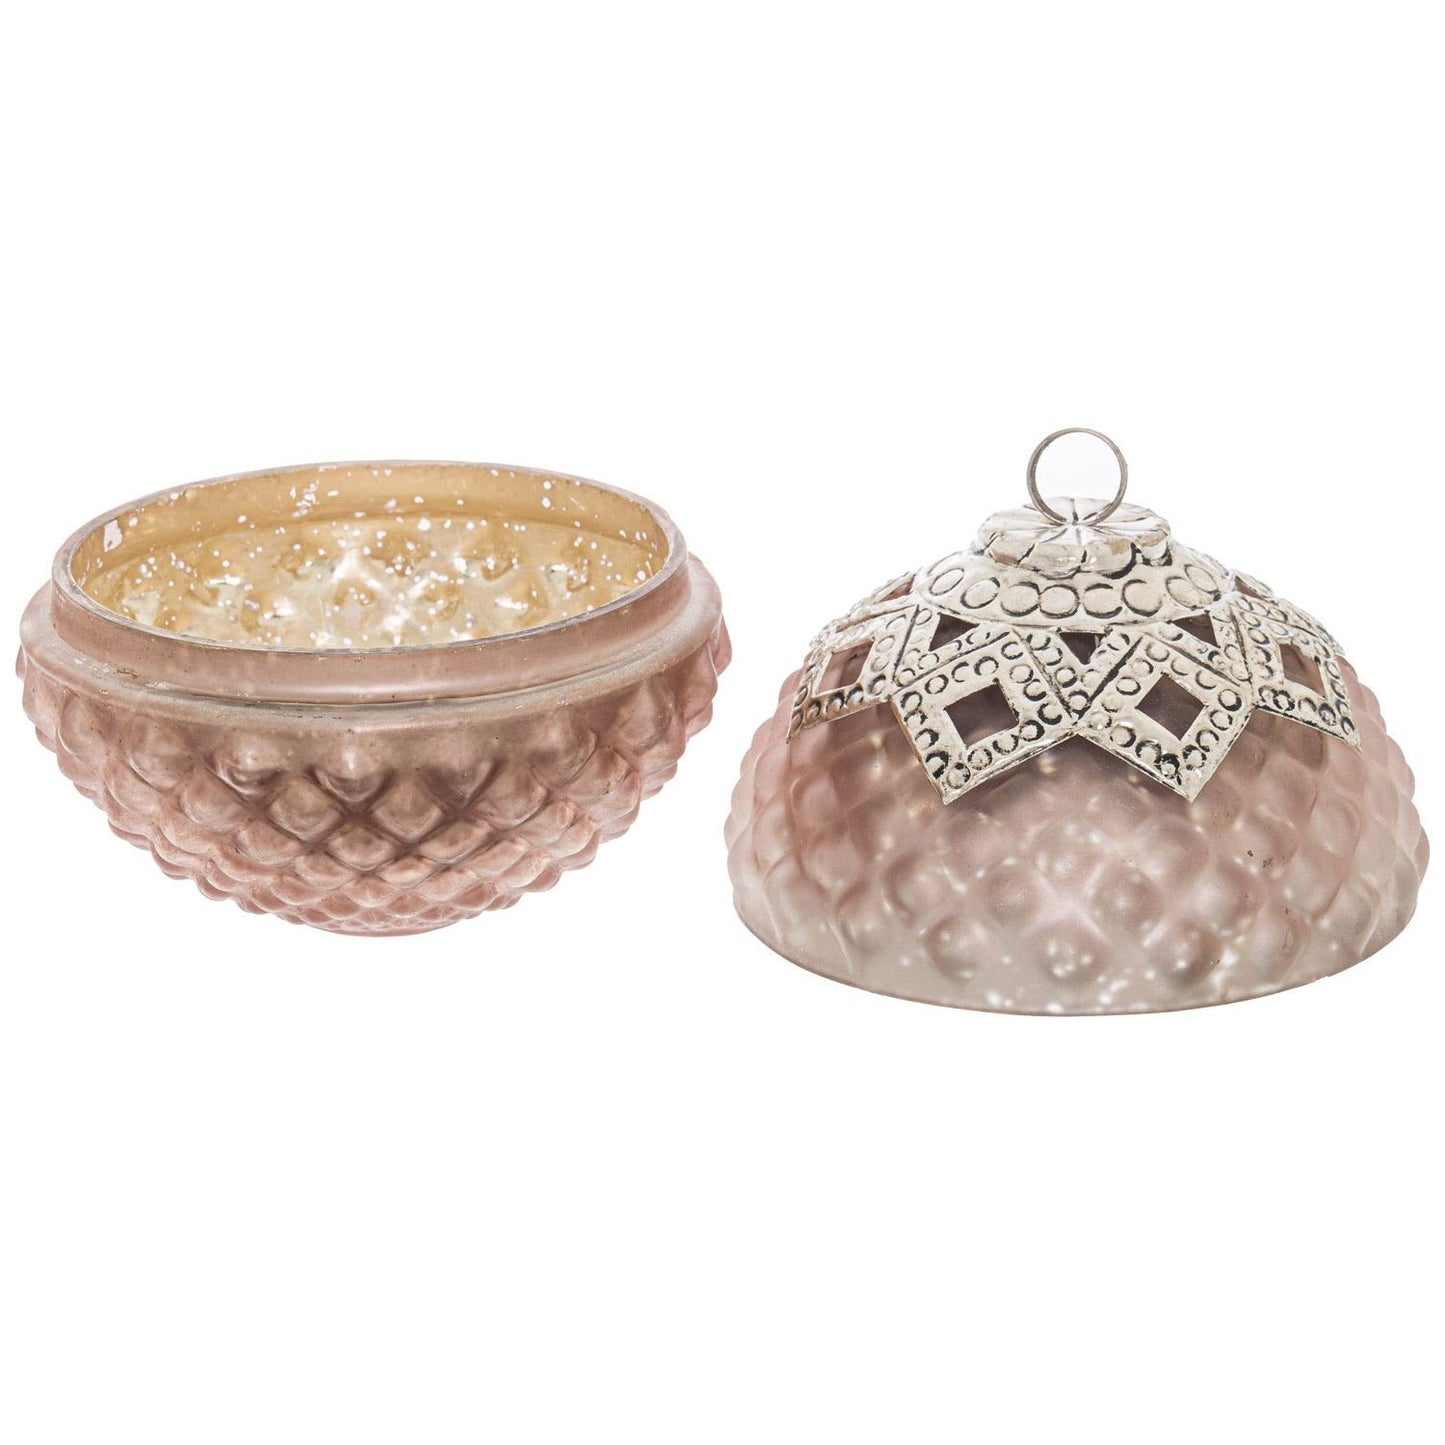 The Noel Collection Venus Diamond Crested Trinket Bauble - Ashton and Finch